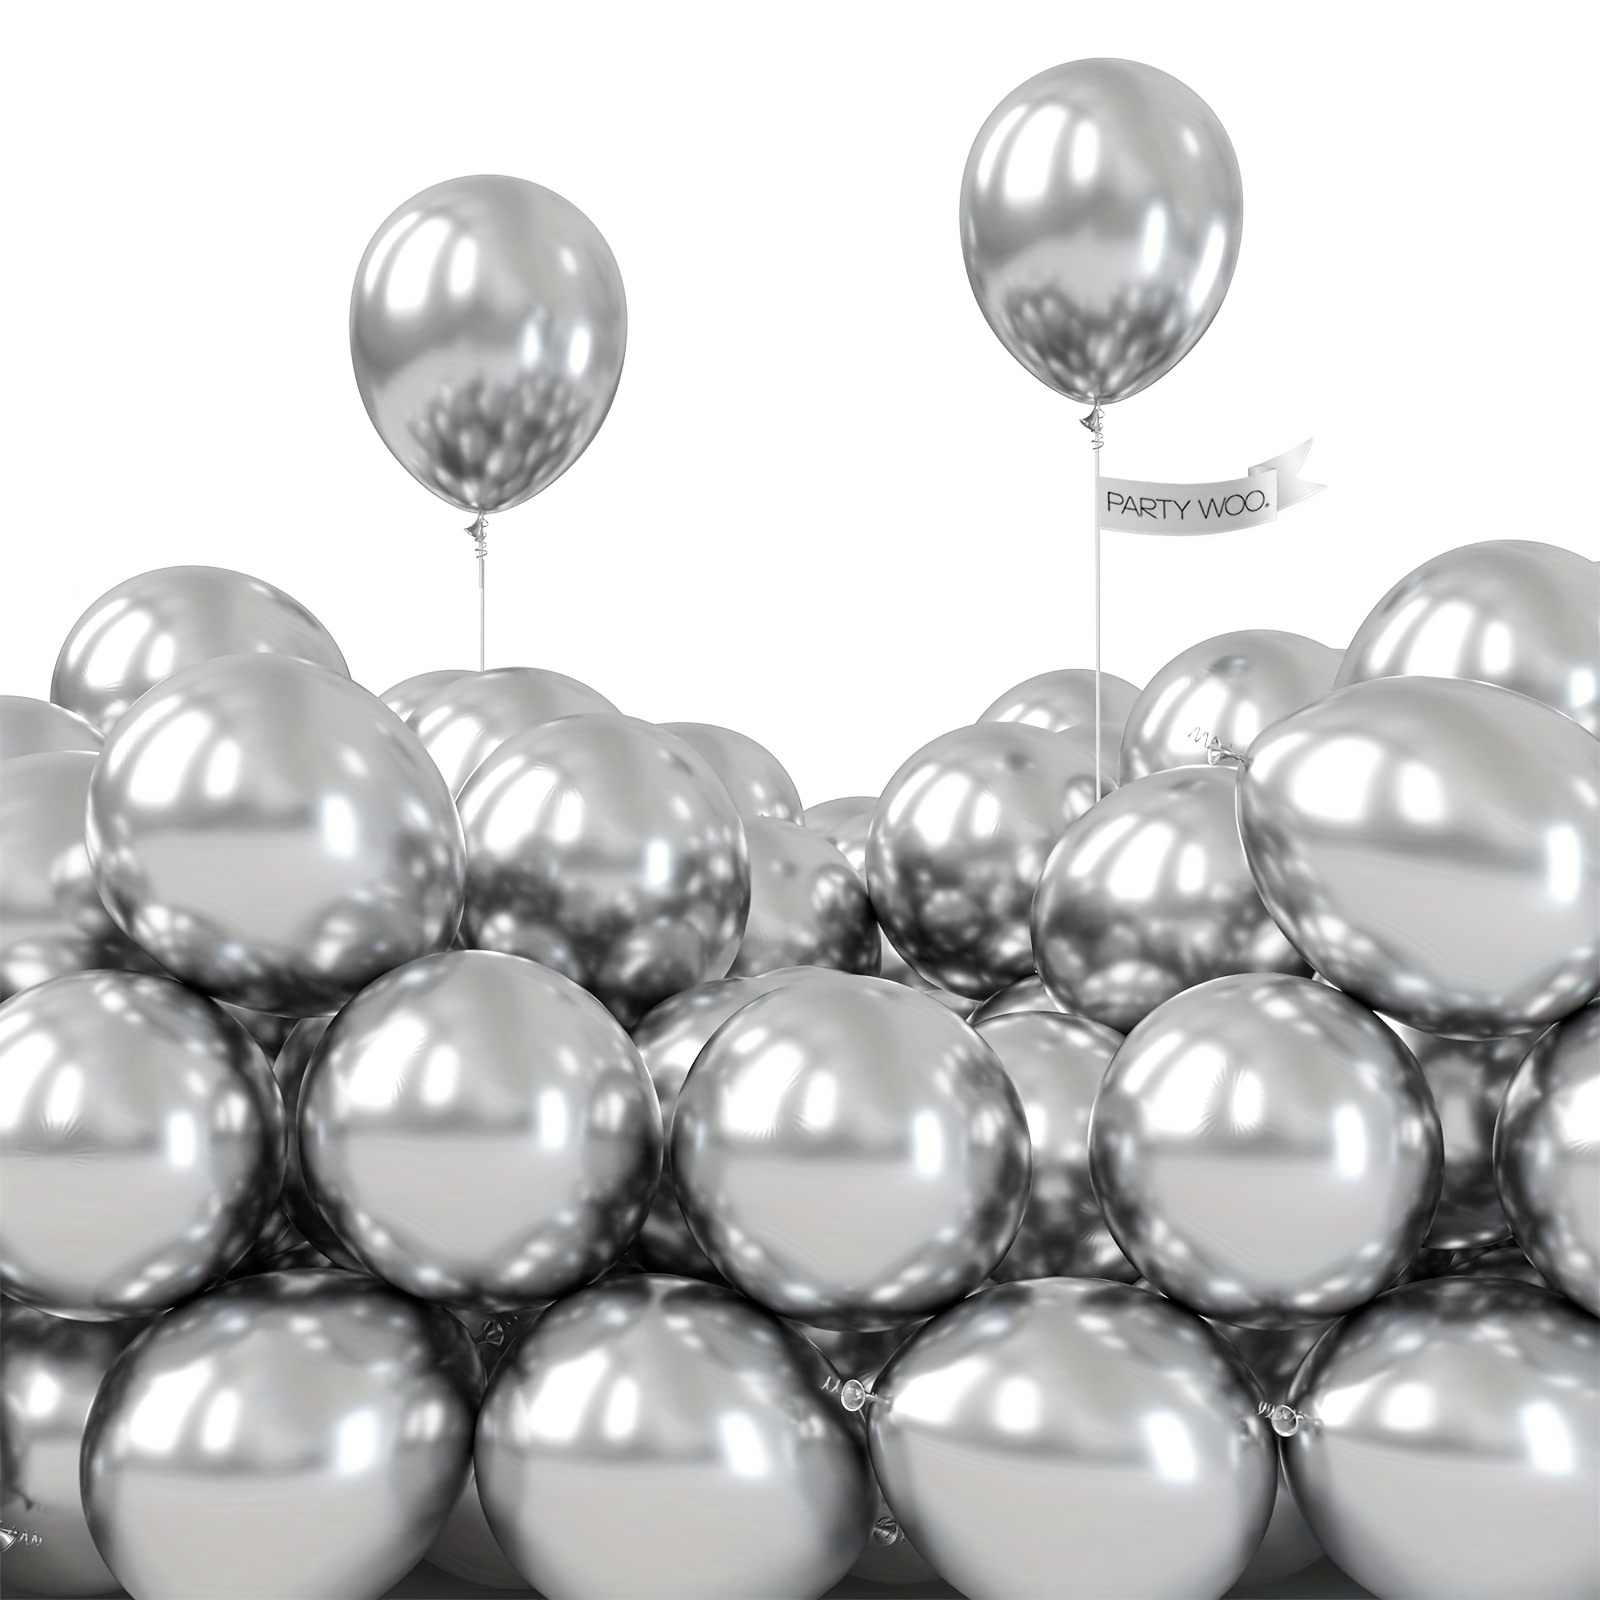 Black And Silver Balloon - 55.88cm, Pack Of 6, Black And Silver Party  Decorations, Silver And Black Balloons, Silver & Black Foil Balloon,  Balloon